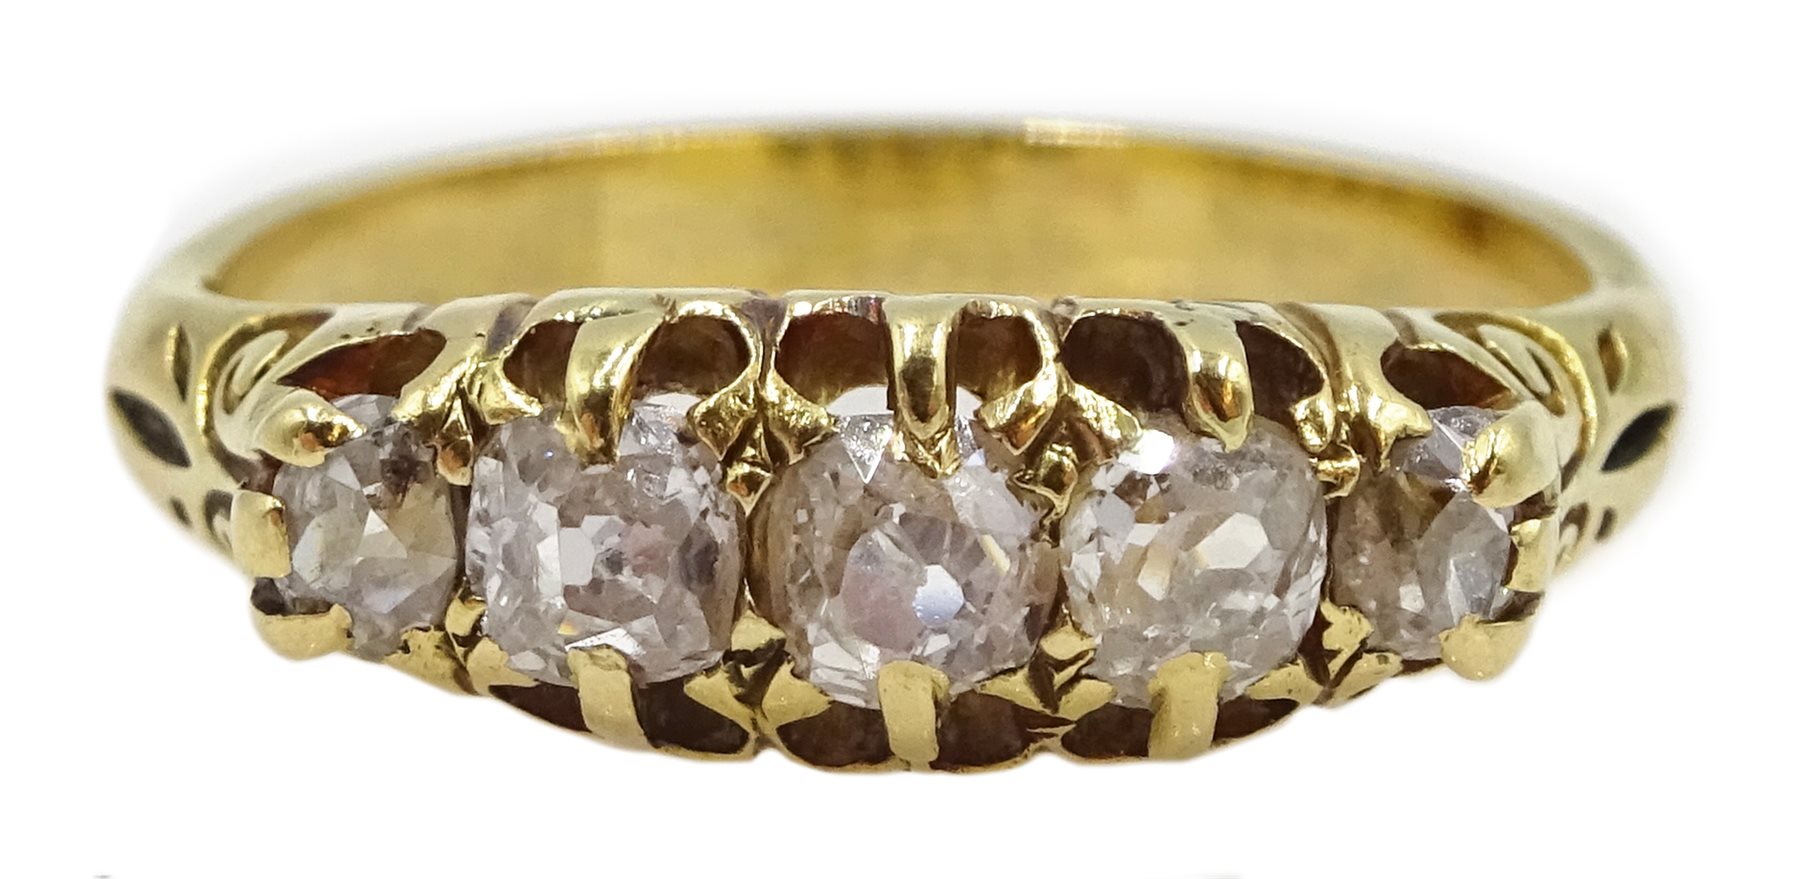 18ct gold five stone old cut diamond ring, total diamond weight approx 0.40 carat